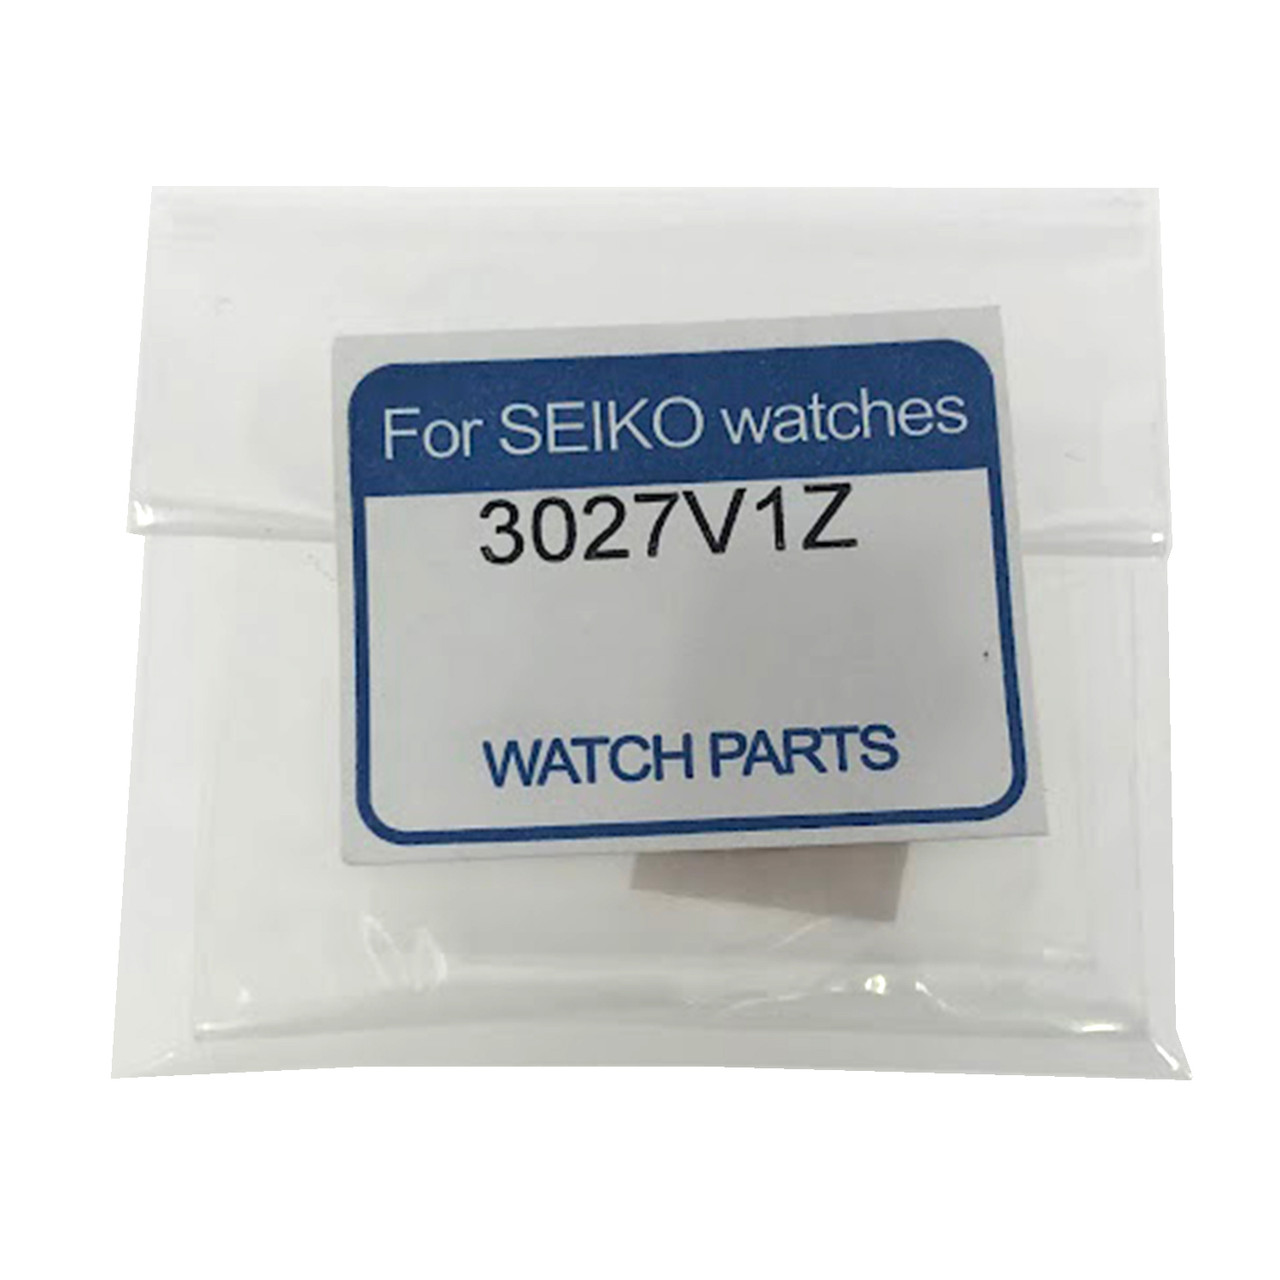 Seiko Solar Watch Battery Replacement Price | tunersread.com